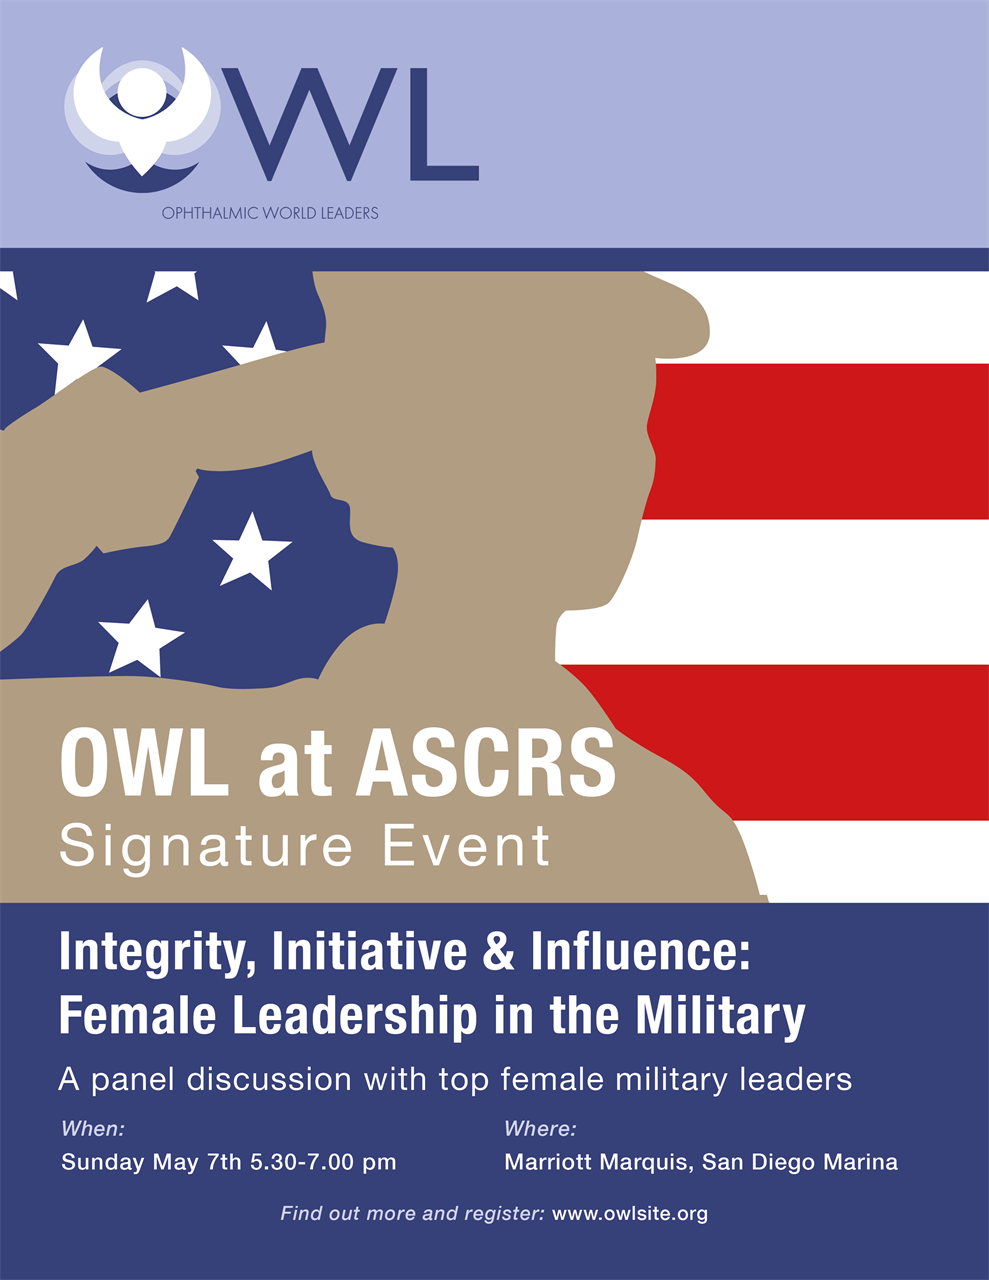 OWL at ASCRS Signature Event at ASCRS; Sunday, May 7, 2023 5:30-7 PM Marriott Marquis San Diego Marina 333 West Harbor Drive, San Diego, CA 92101 (Grand Ballroom)